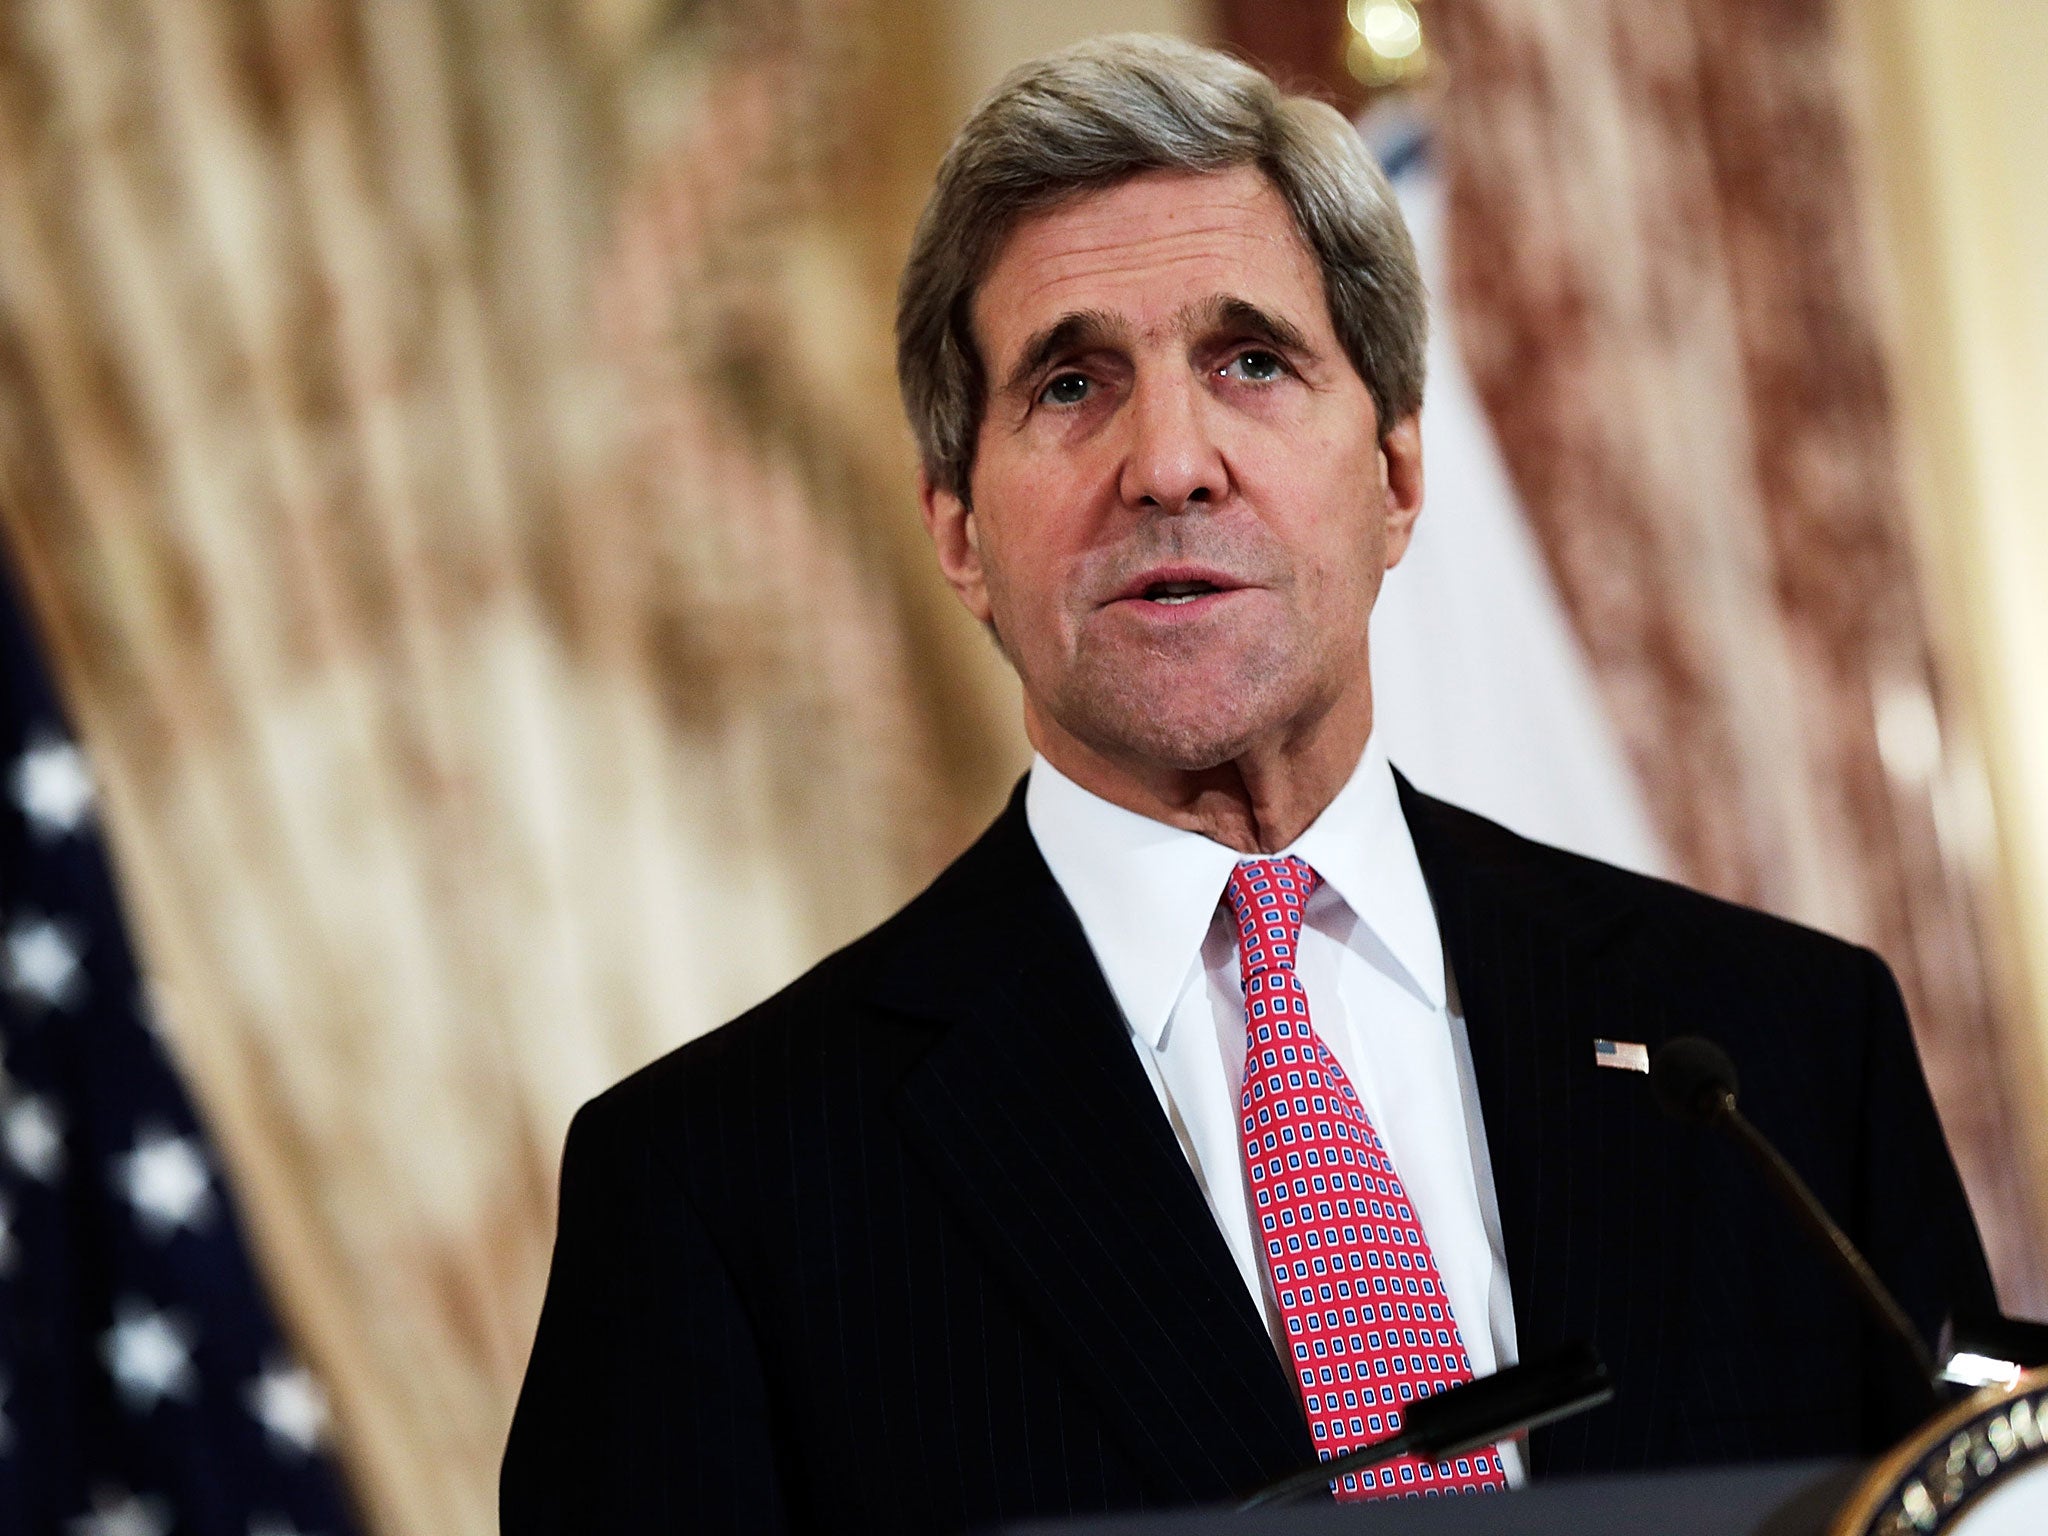 John Kerry has spoken to his Russian counterpart for the third time in 10 days over the issue (Getty)